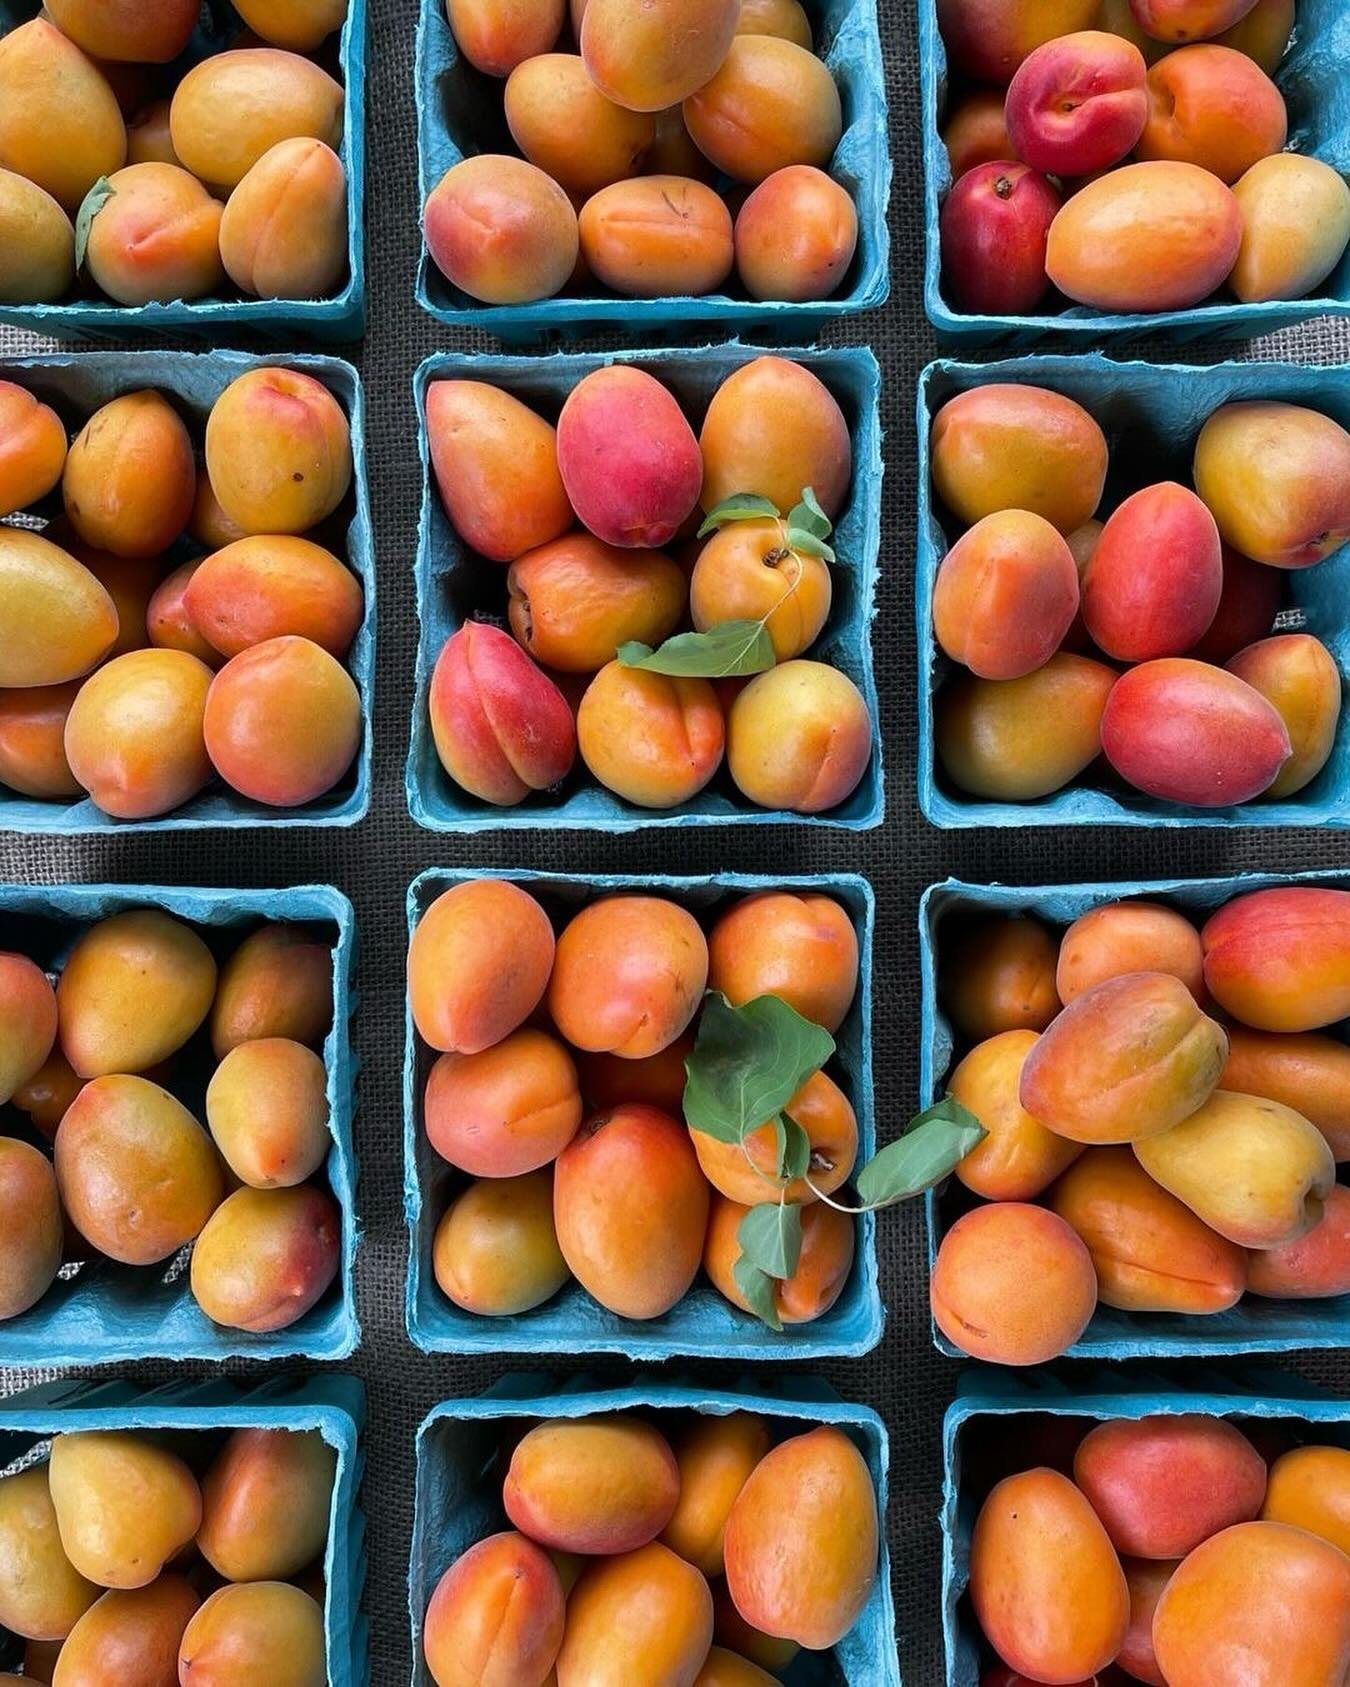 💪🌞 THE MOMENT YOU&rsquo;VE BEEN WAITING FOR IS HERE&mdash;late spring / early summer fruit is coming in from @SunnyCalFarms!

🍑 STARTING TOMORROW 
White Peaches 
Apricots (Dreamcots)
&amp; Yellow Peaches 

🫐 STARTING NEXT THURSDAY
Blueberries

FA